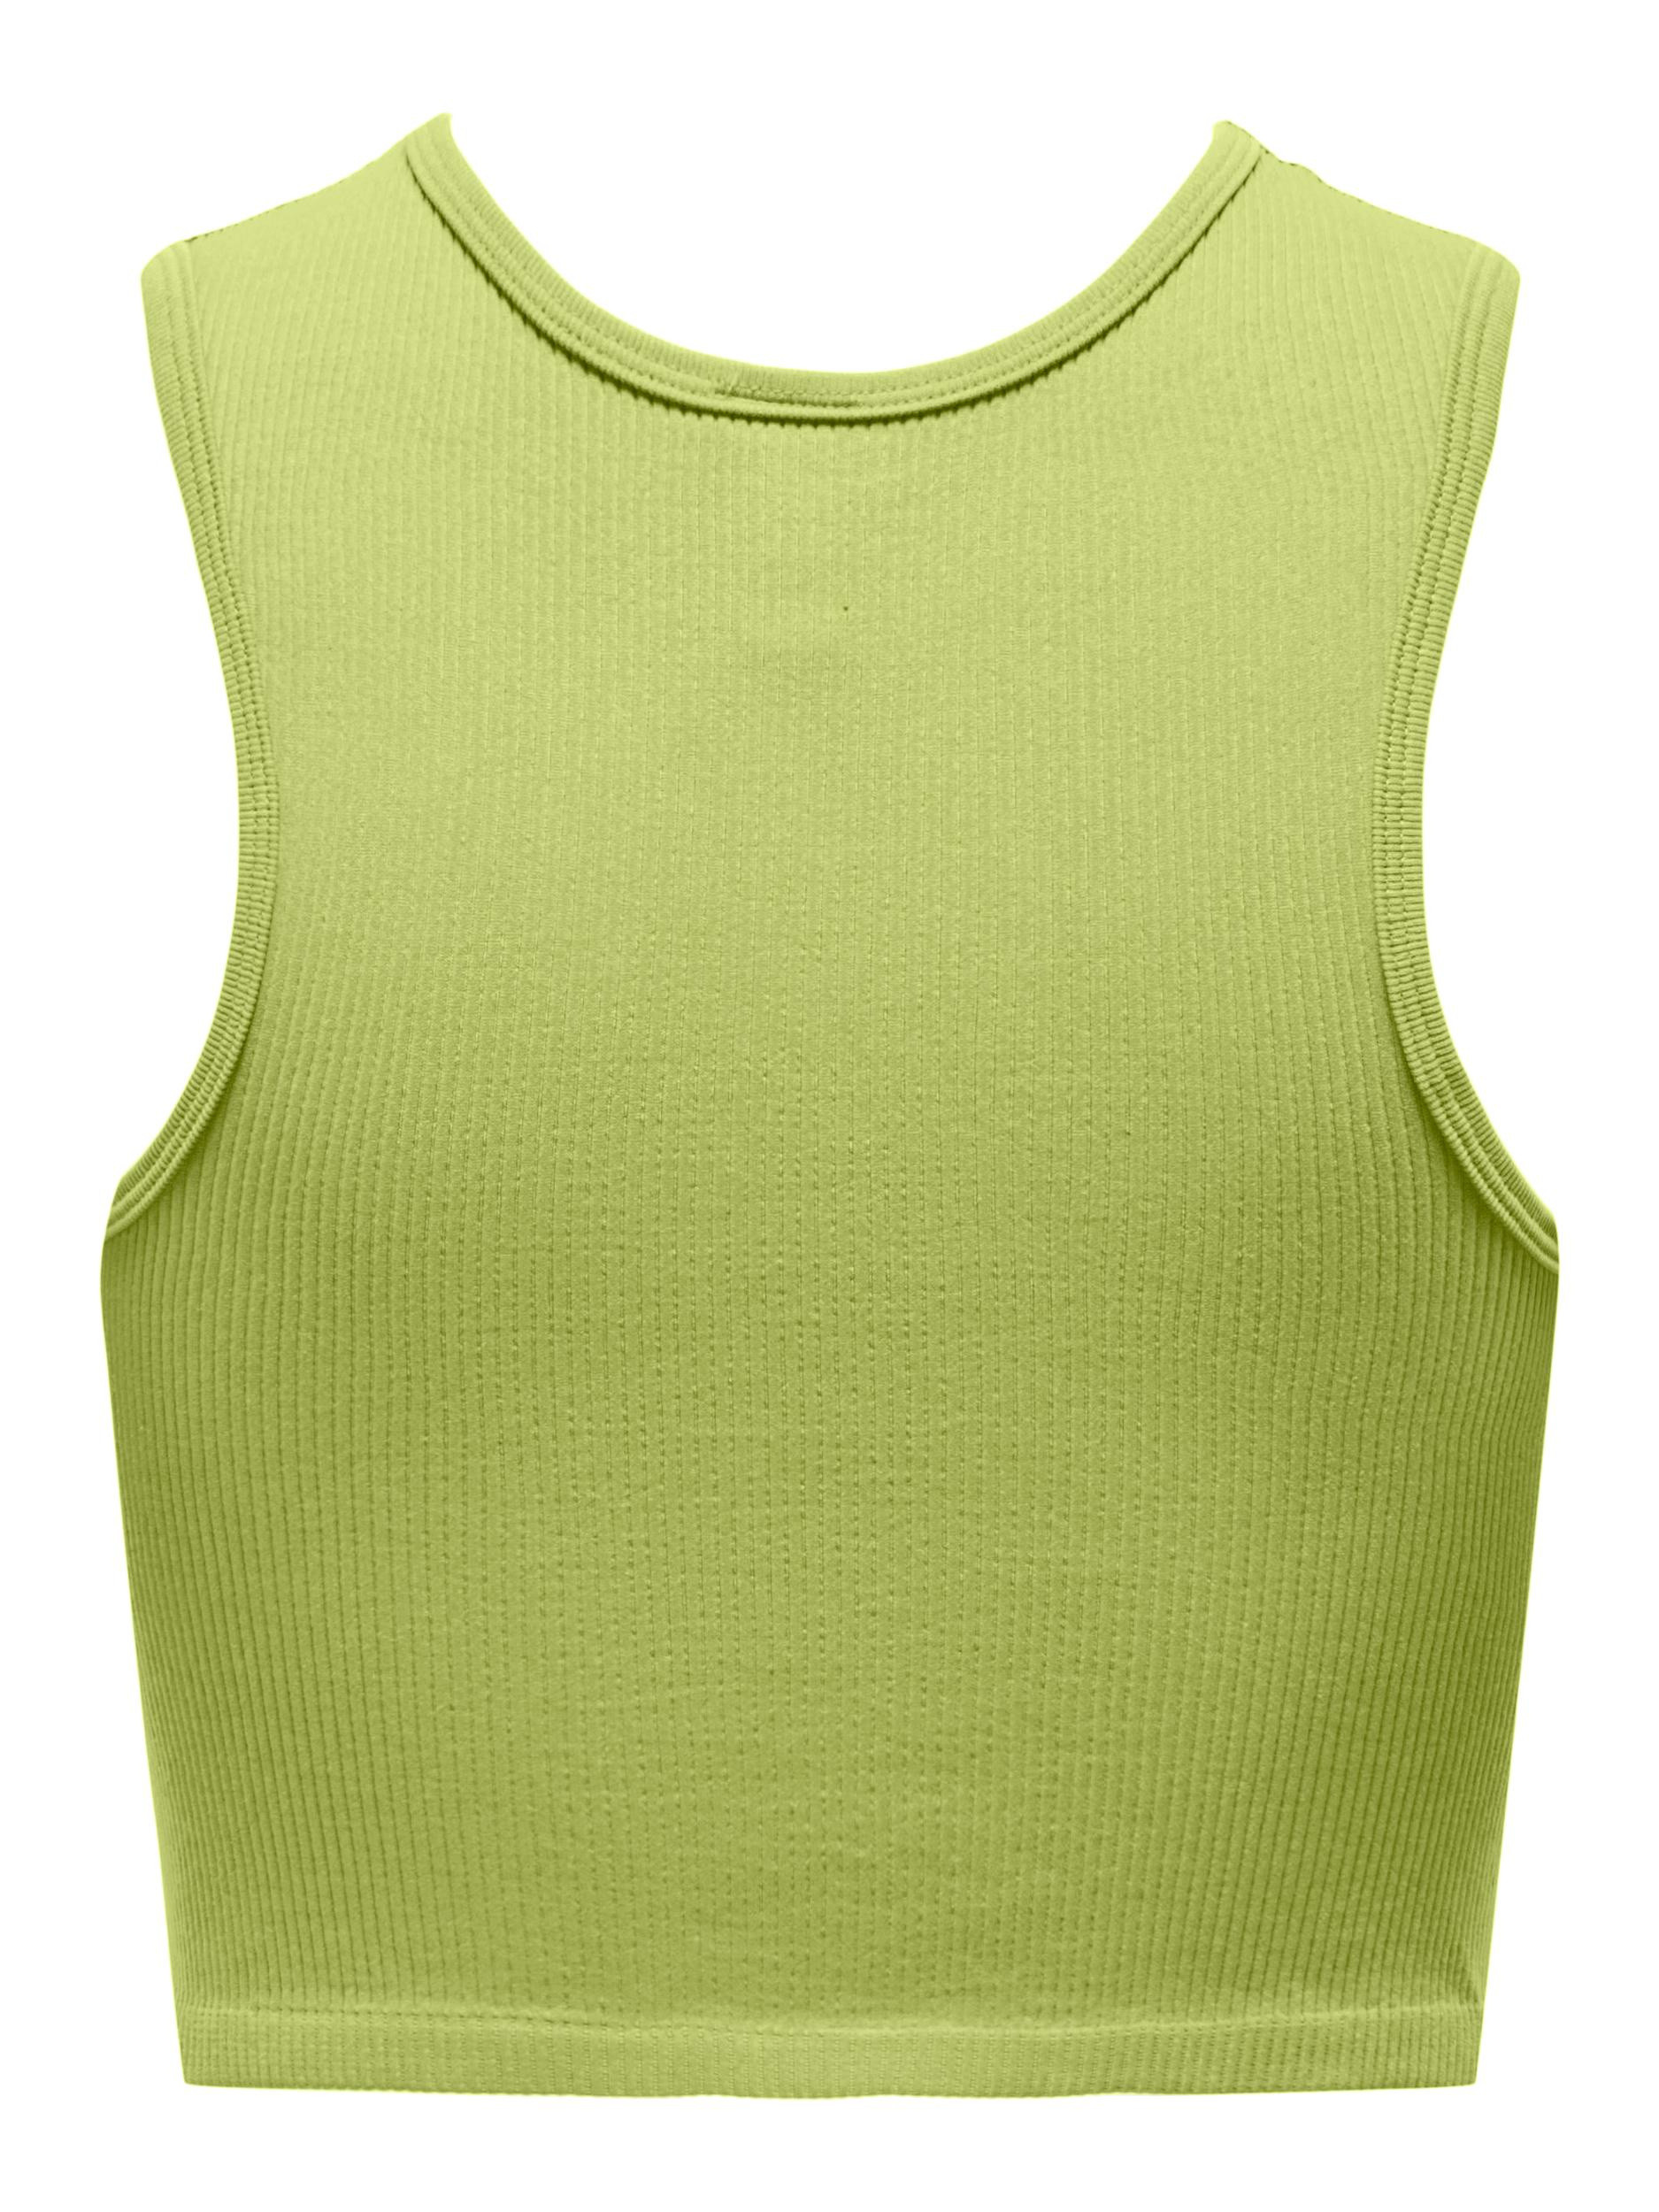 Only - Stretch-fit top, Lime Green, large image number 1